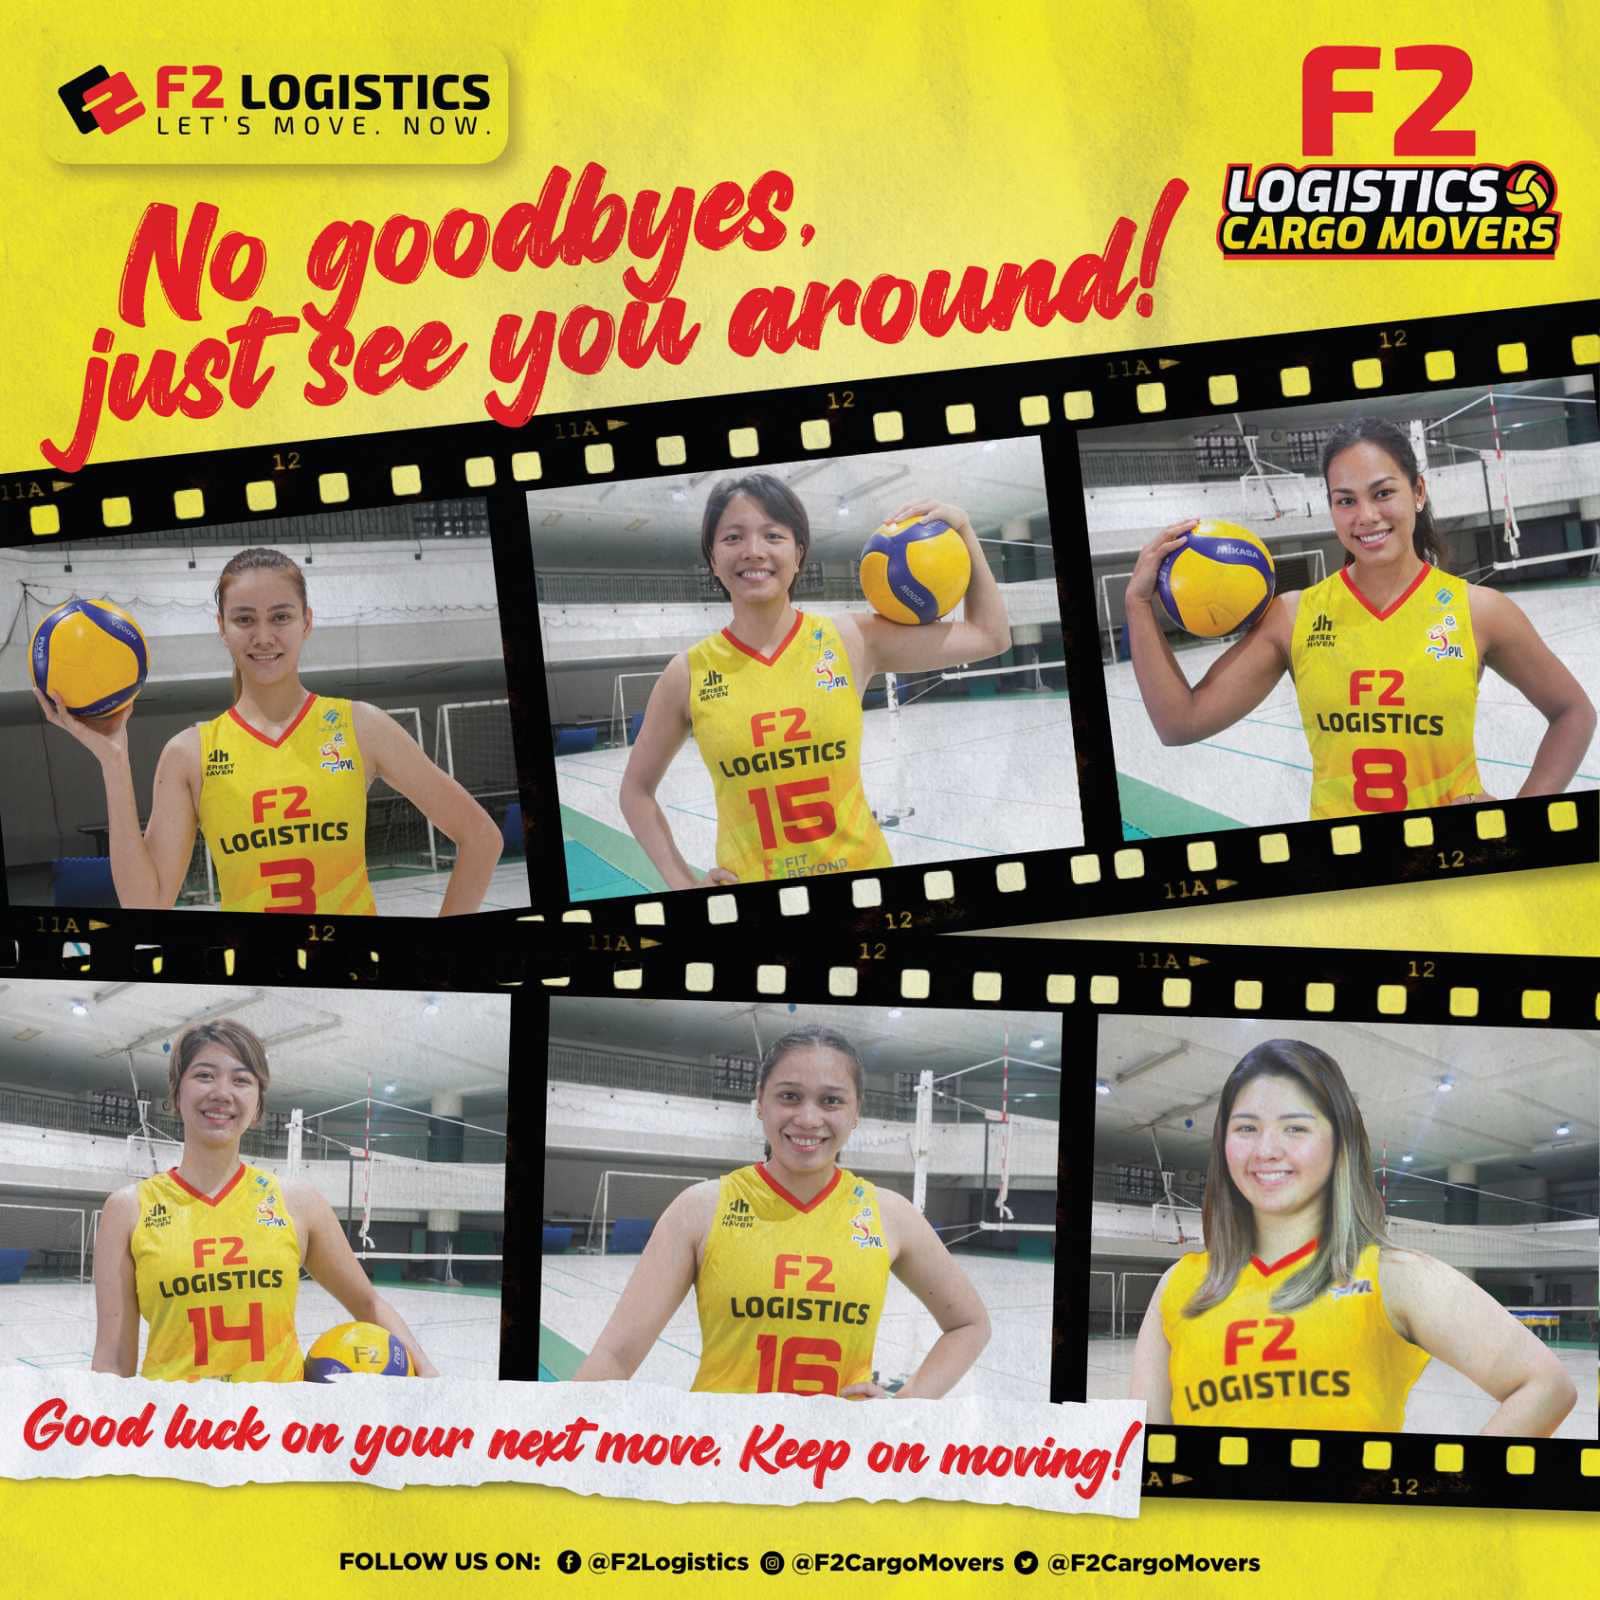 F2 Logistics parts ways with some of its players ahead of the new PVL season.